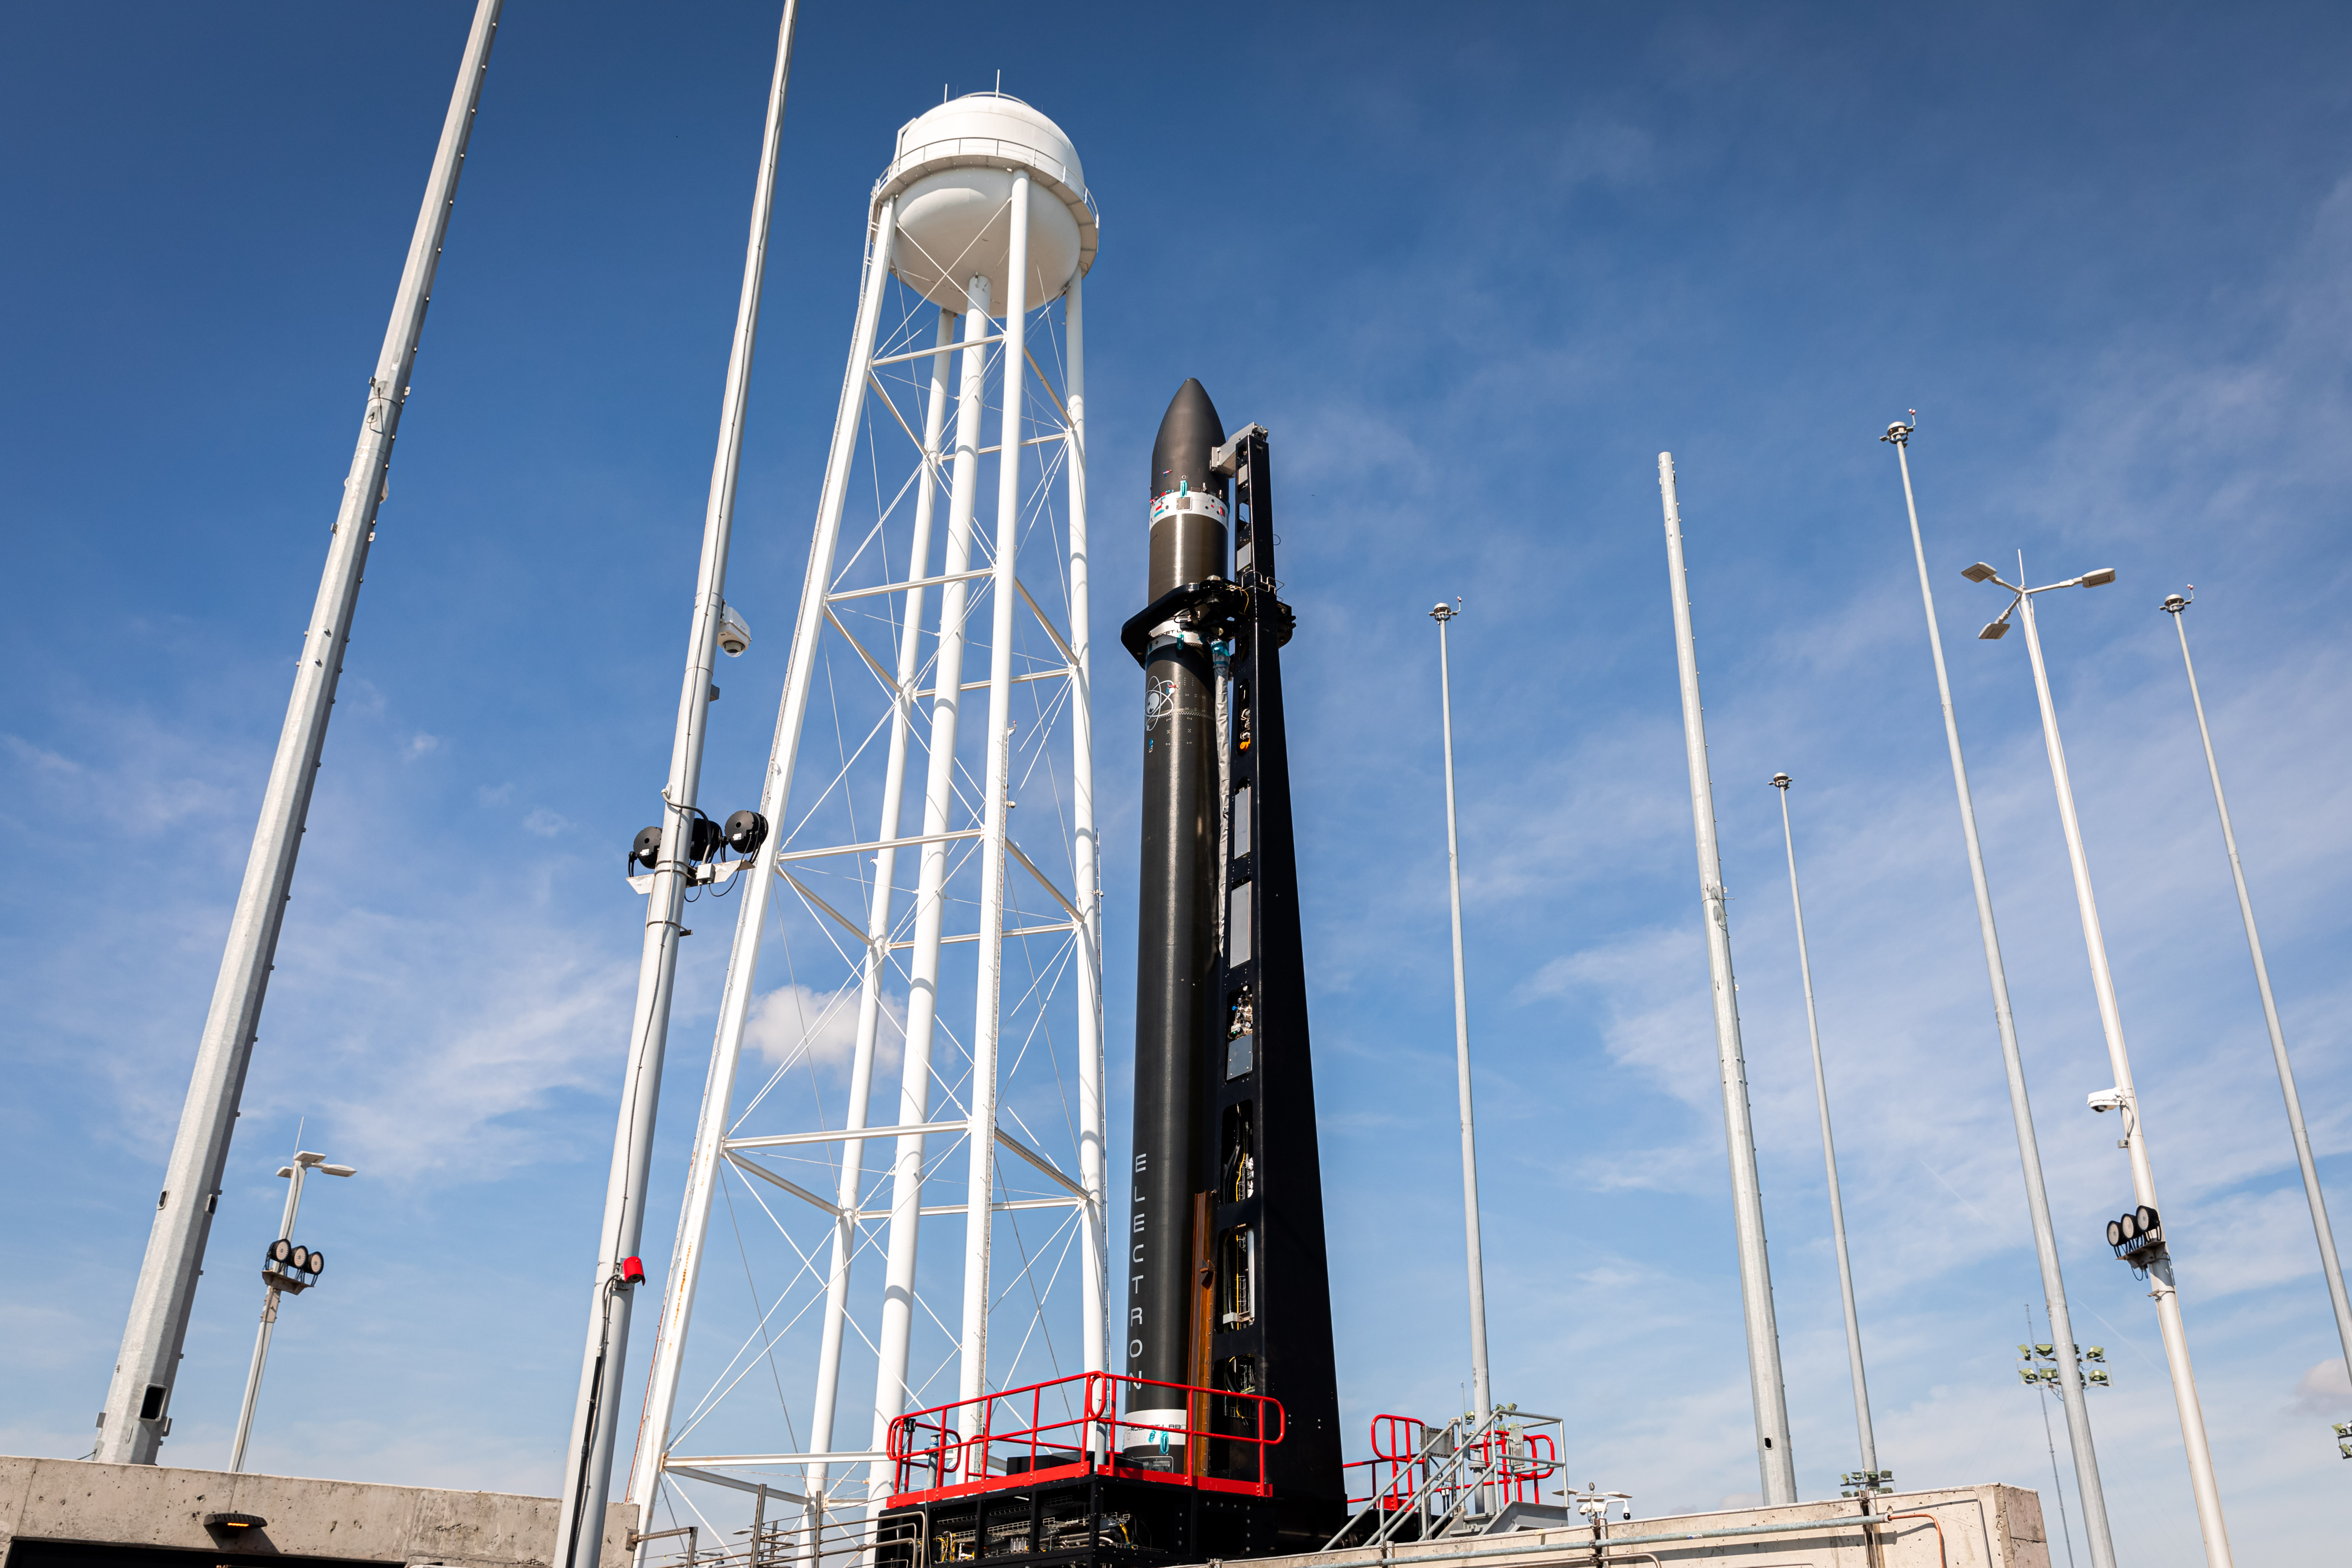 RocketLab's Electron has been rolled out to its launchpad for the first time (pictured). Photo via RocketLab.